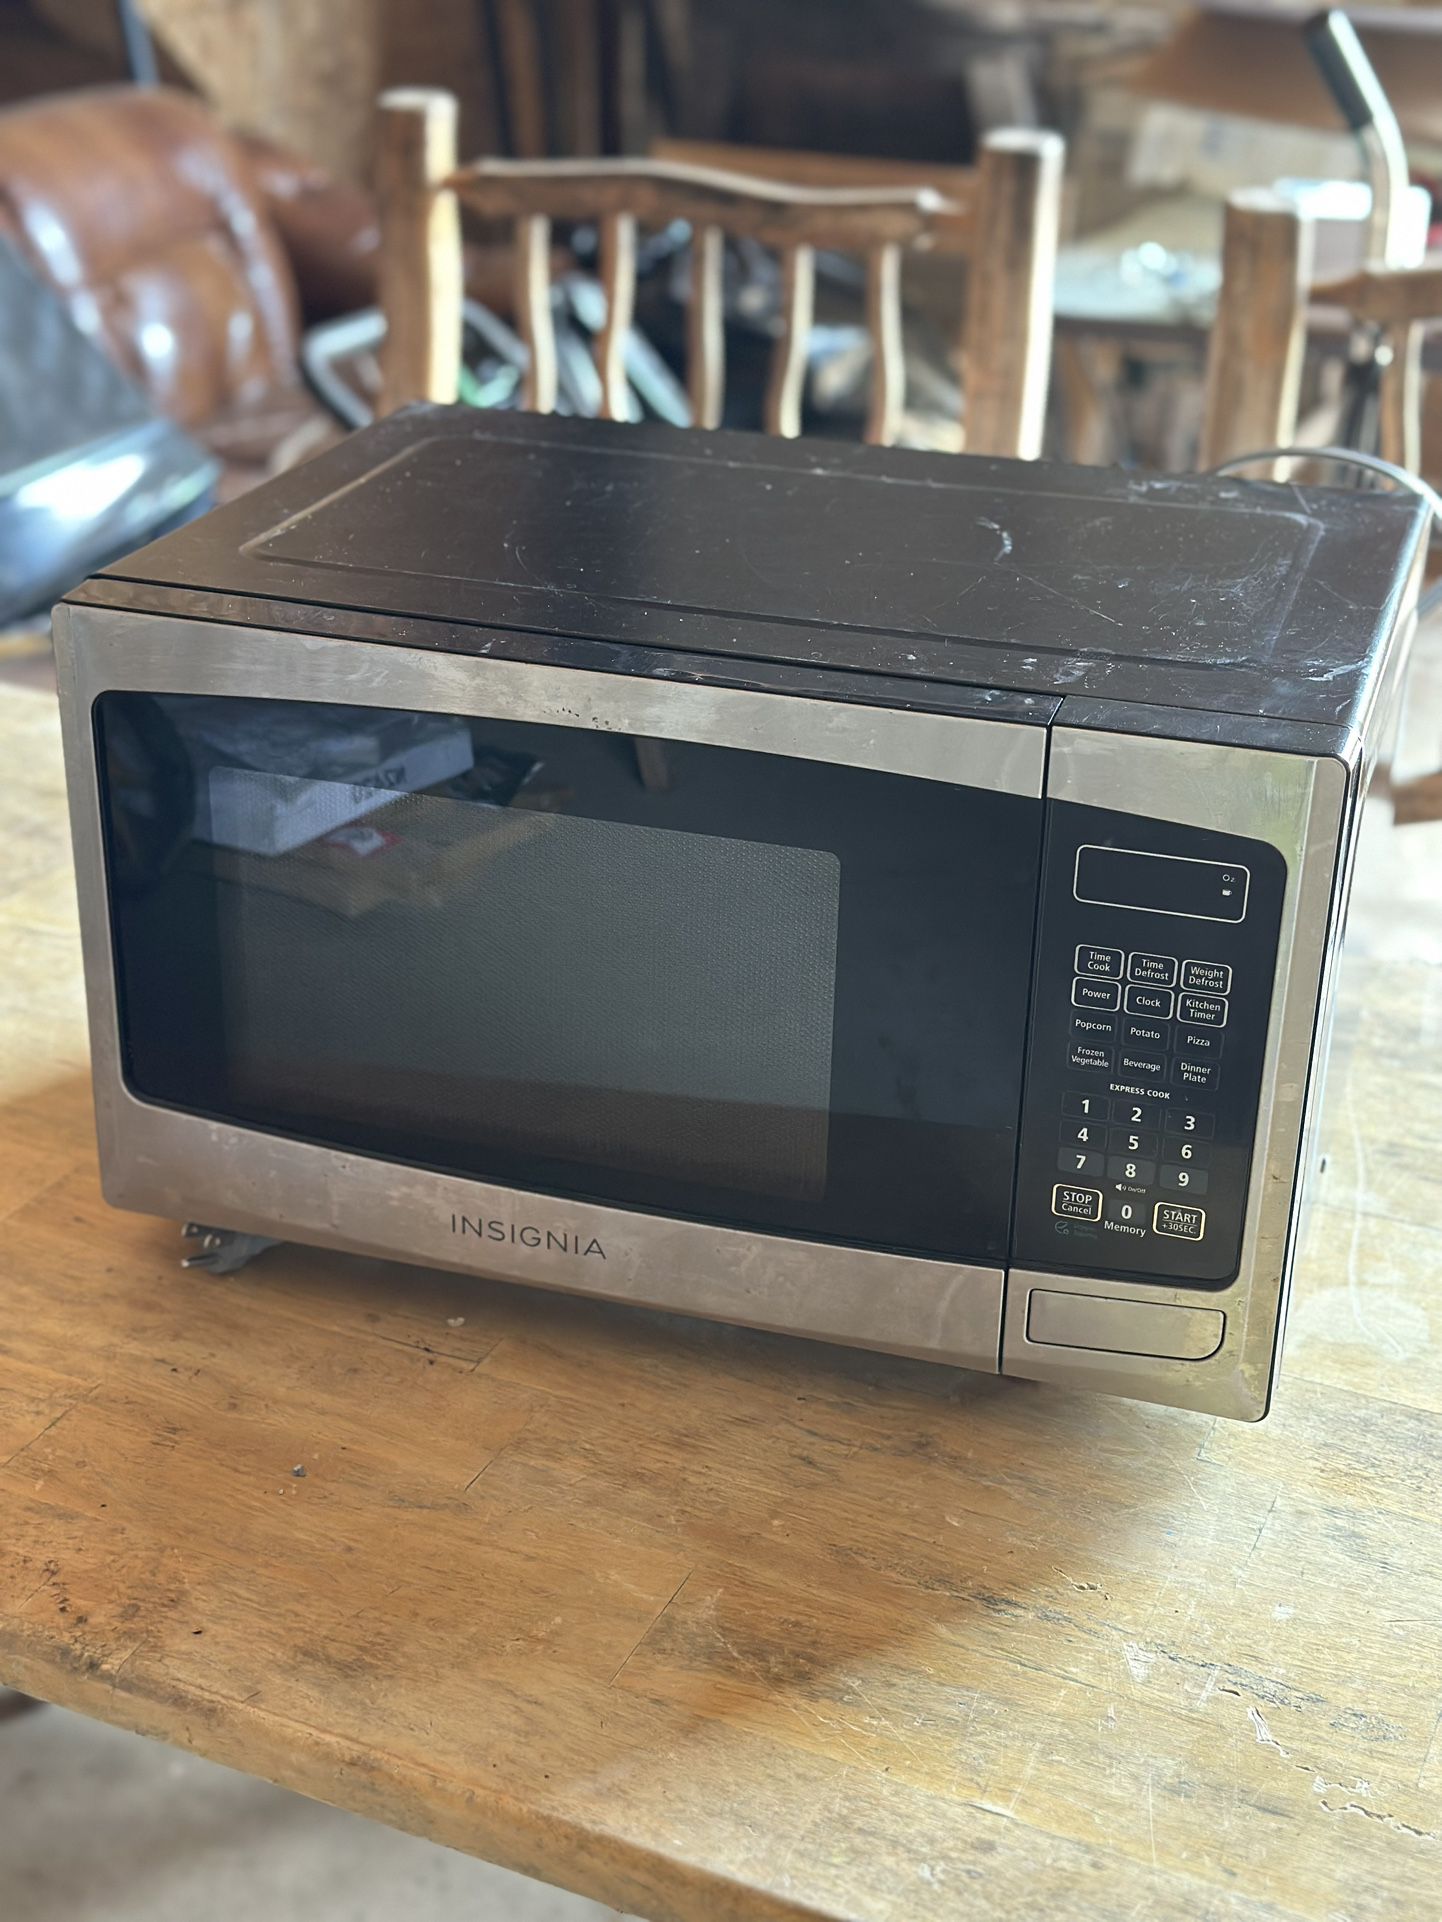 New Microwave for Sale in Newberg, OR - OfferUp